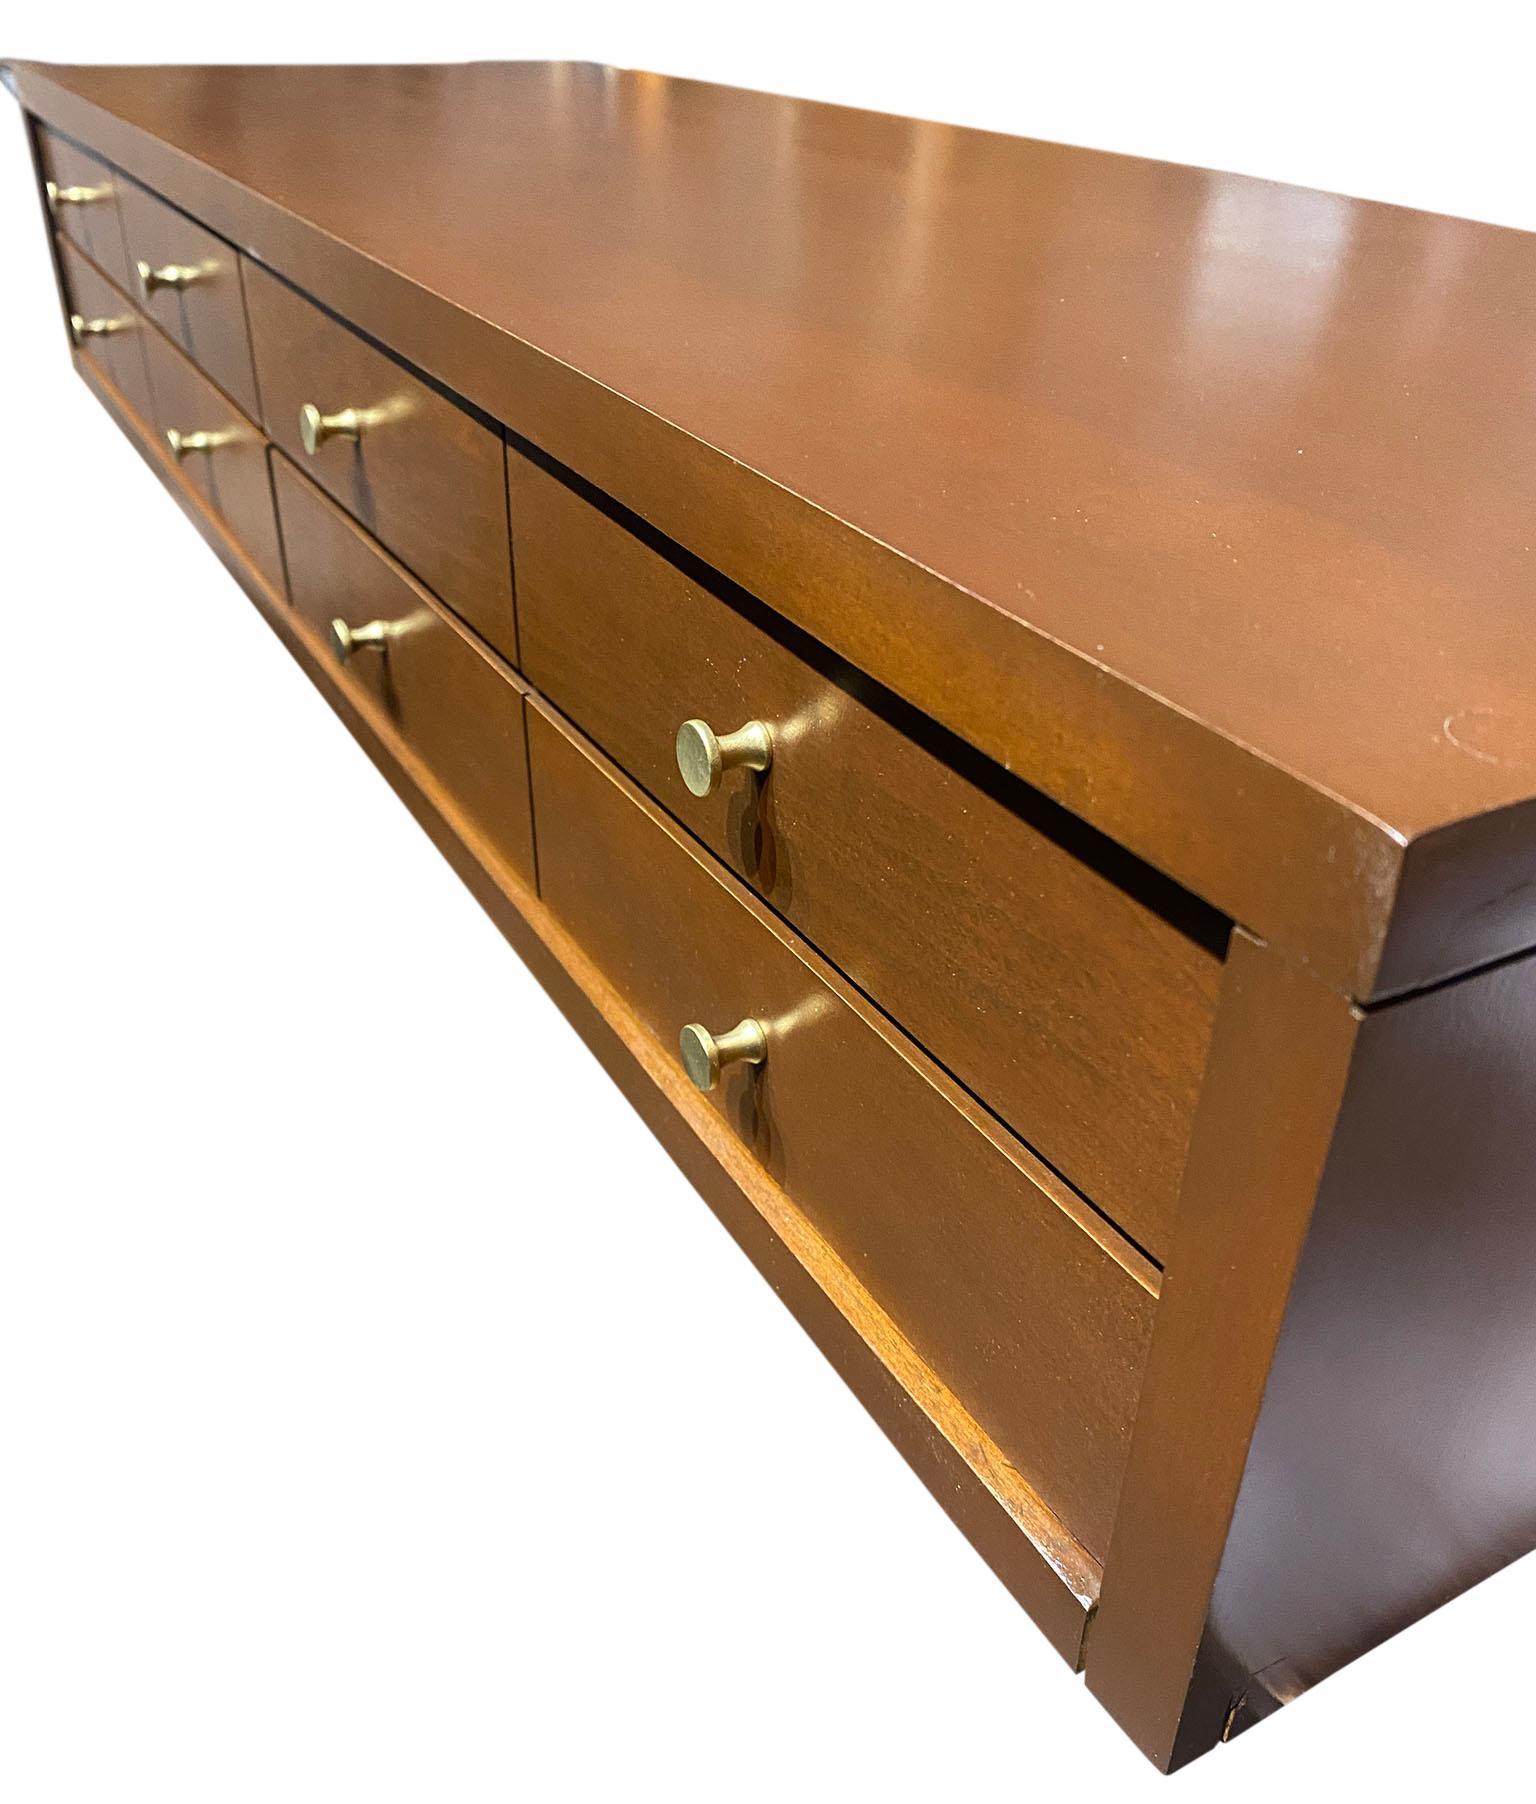 Midcentury Paul McCobb Small Jewelry Chest 4 Drawers Maple Brass Brown Finish For Sale 2